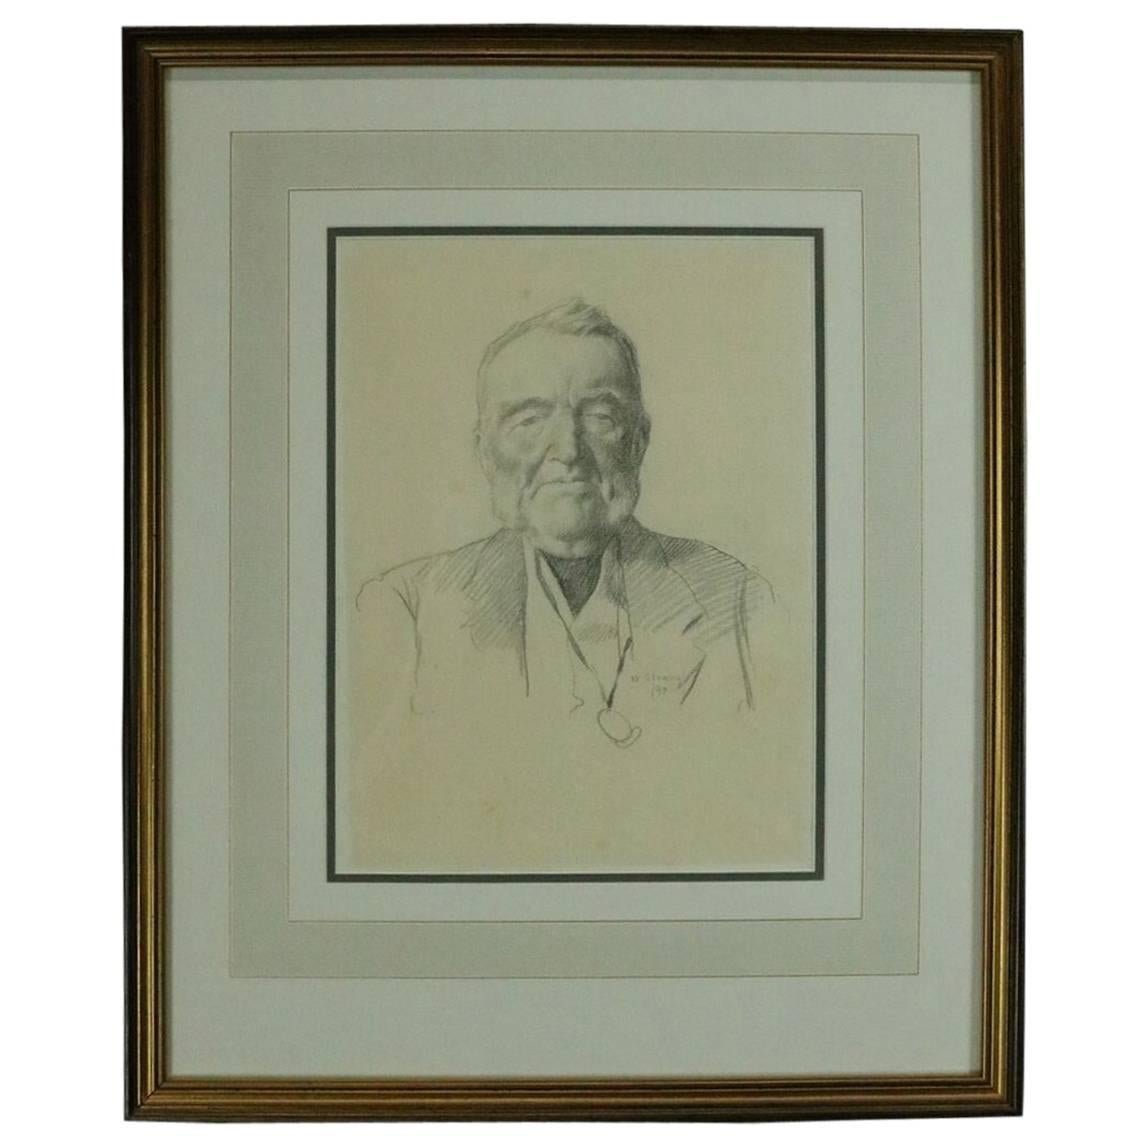 Antique Scottish Pencil Drawing by Sir Wm. Strang "Portrait of an Advocate" 1890